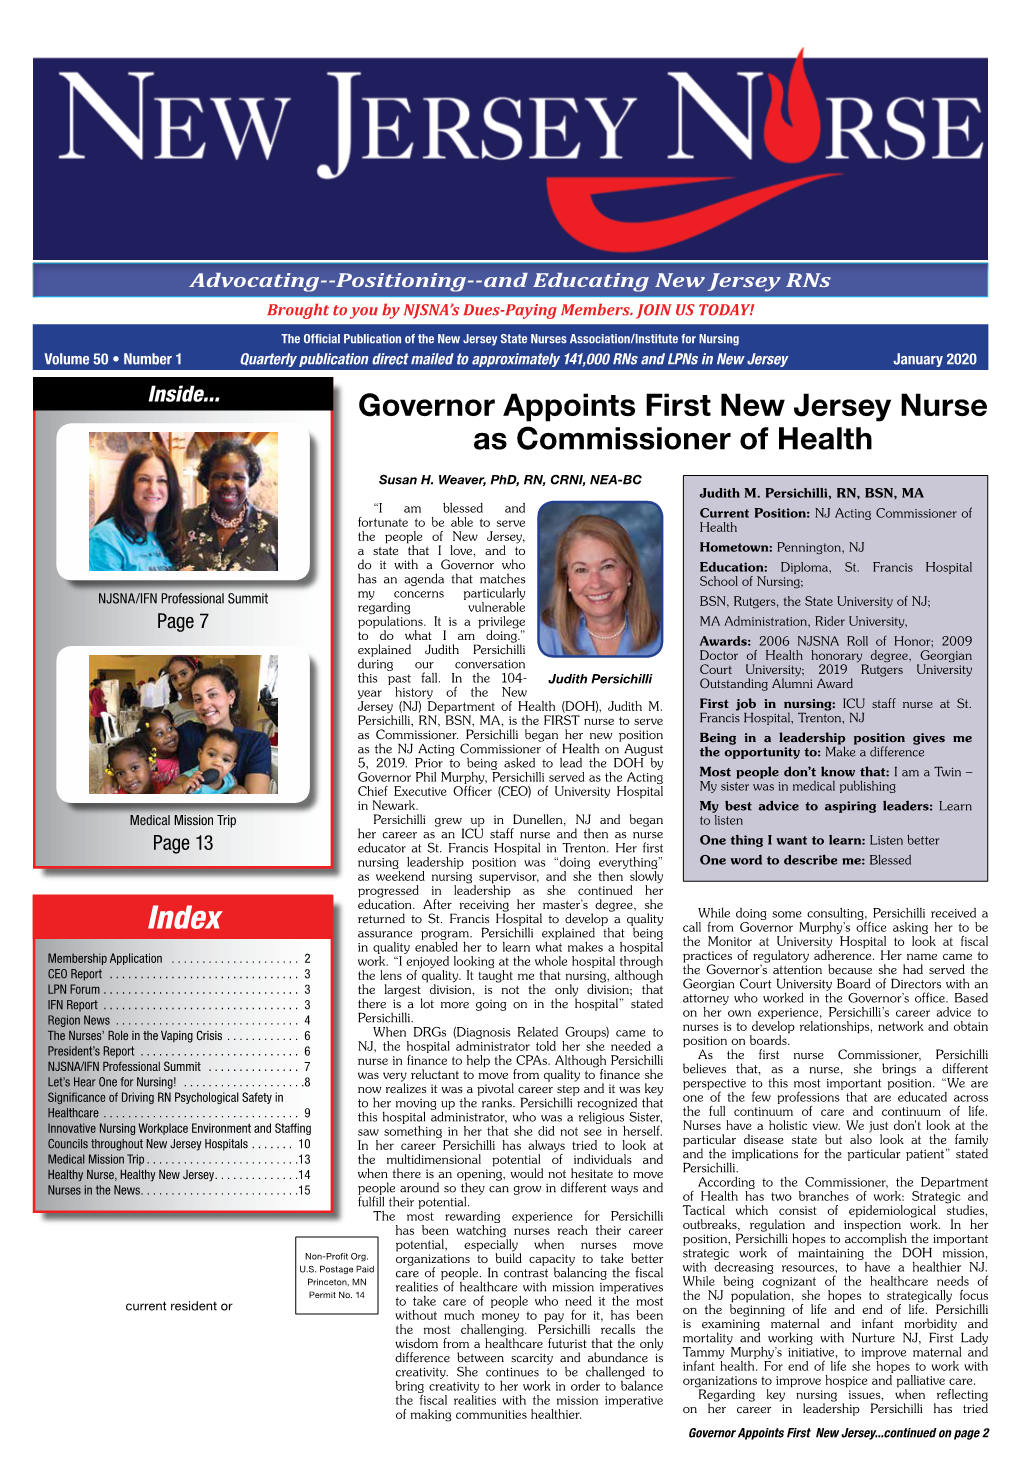 Governor Appoints First New Jersey Nurse As Commissioner of Health